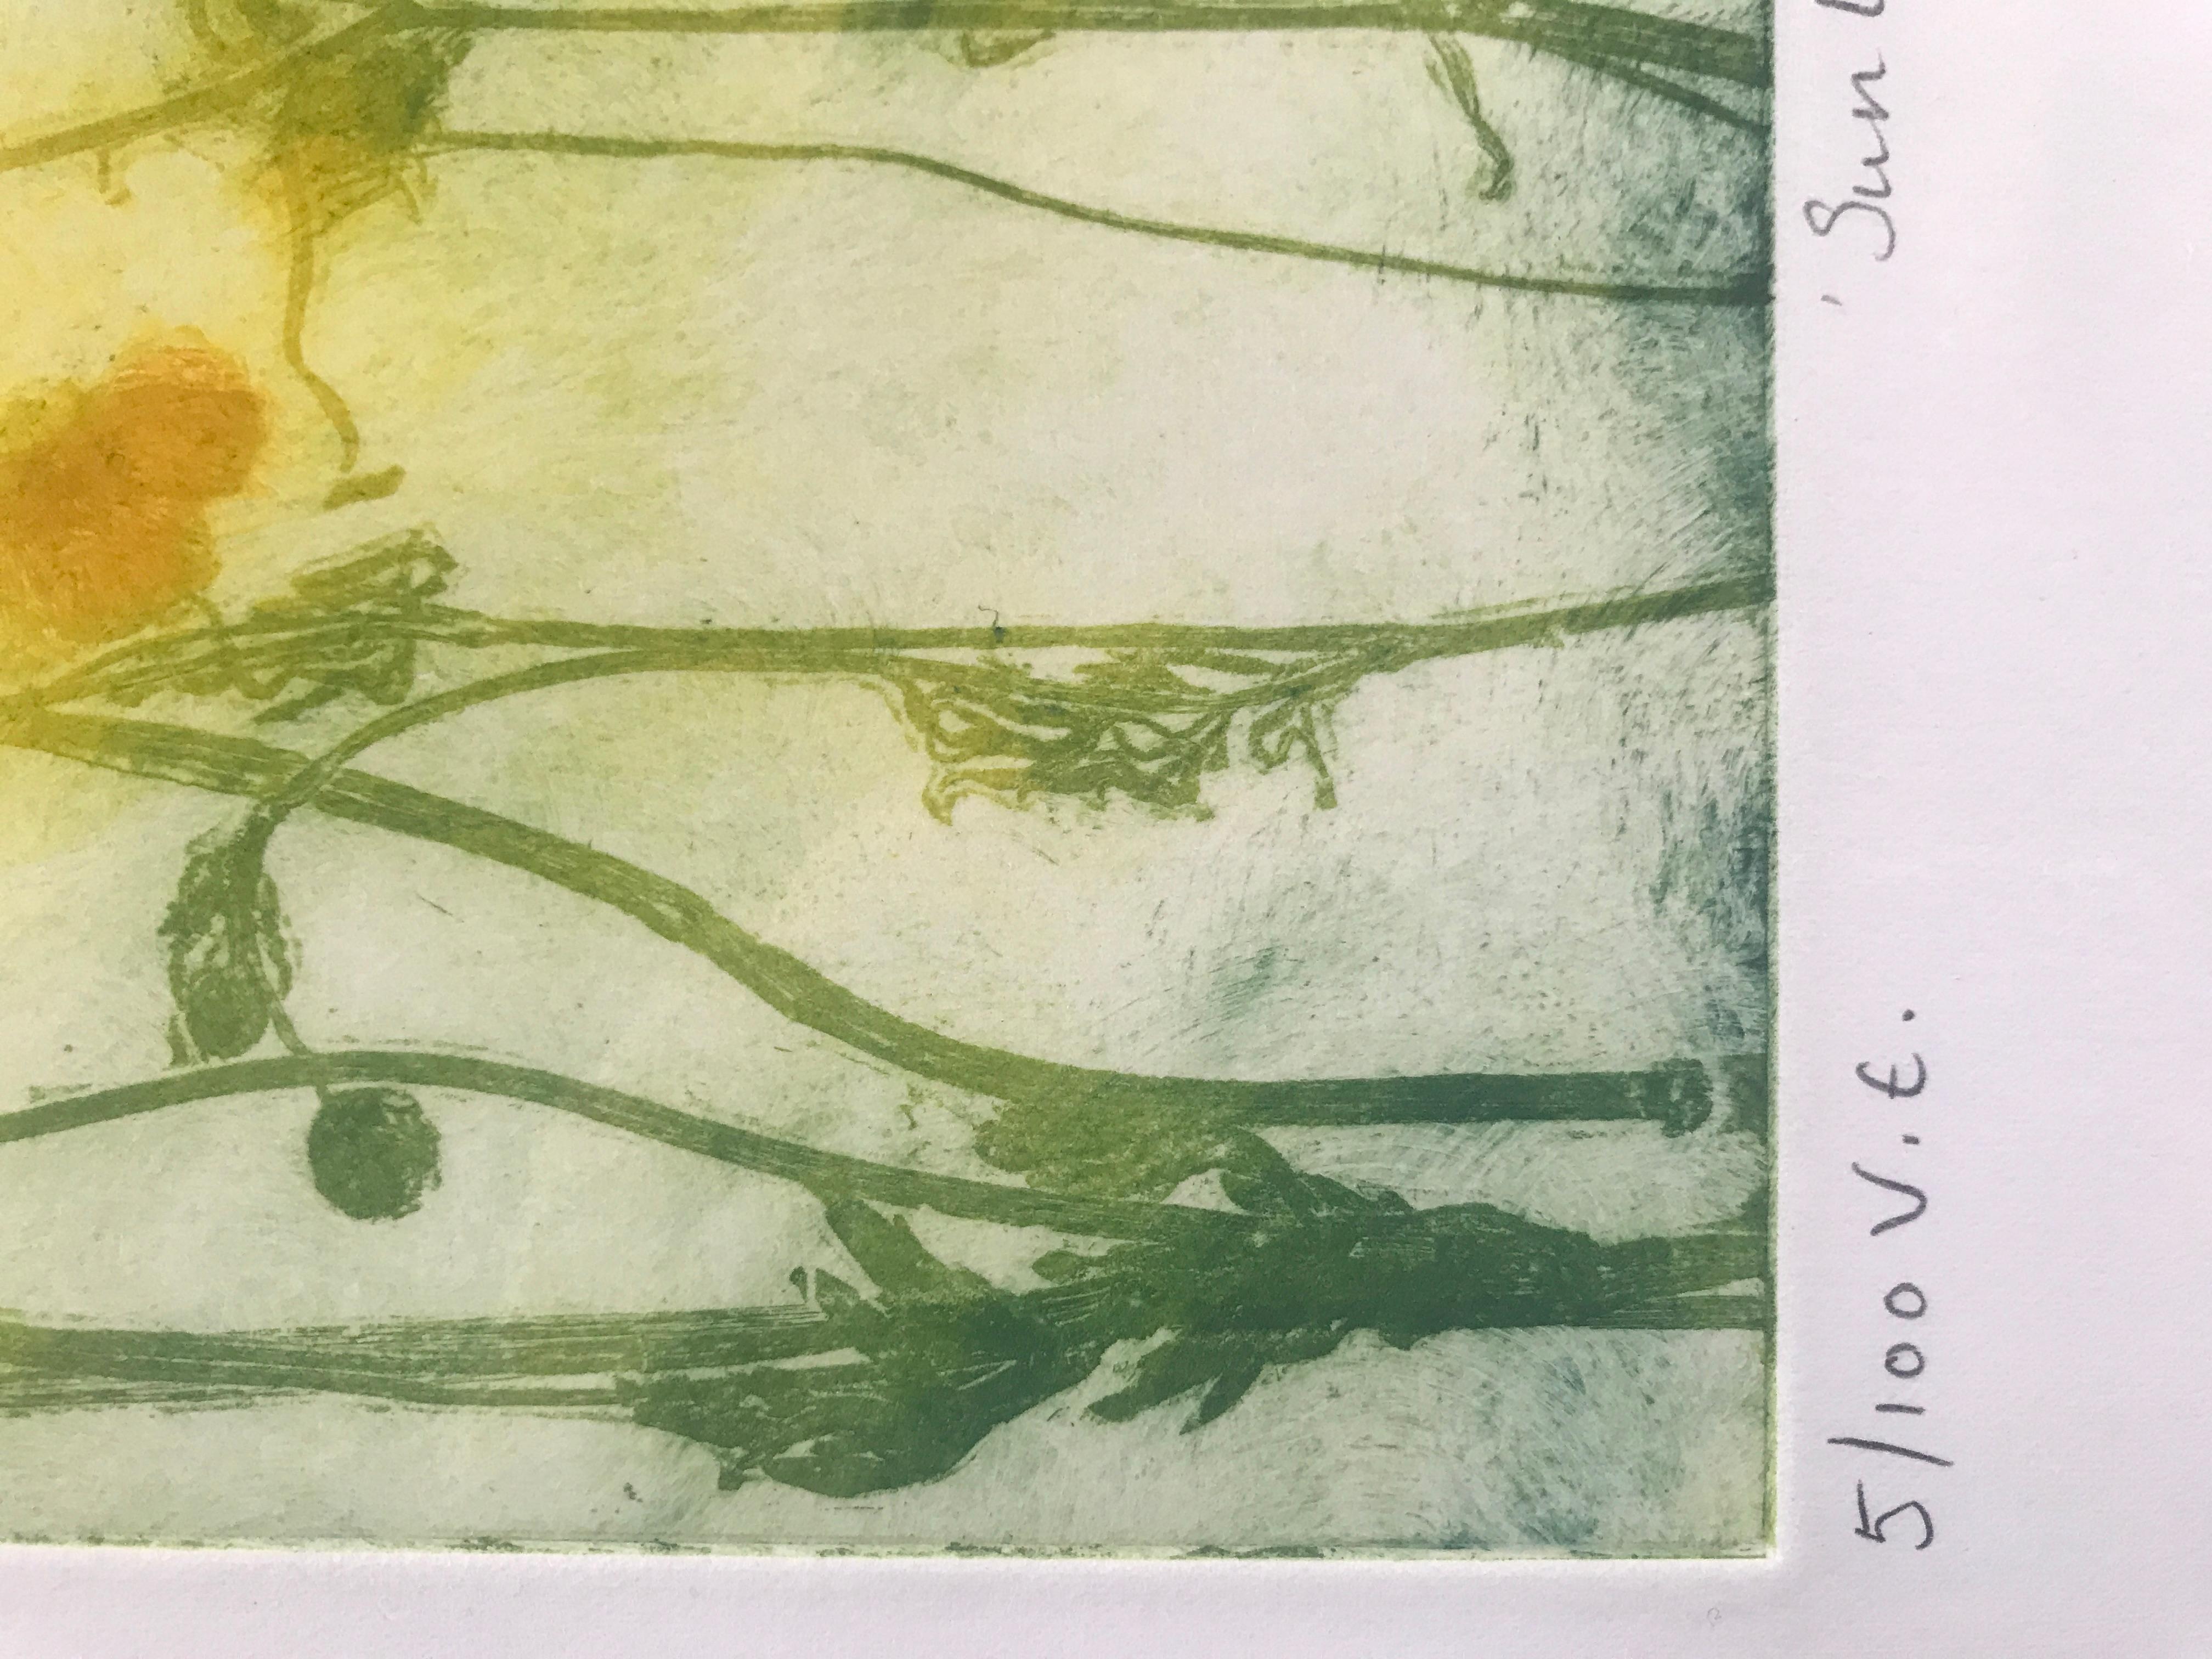 Sunlit Buttercups by Charlie Davies is a limited edition print made using real flowers and fauna from nature to make the etching plate. Part of the printmaking process that Charlie has so tastefully mastered produces slight variations when rubbing